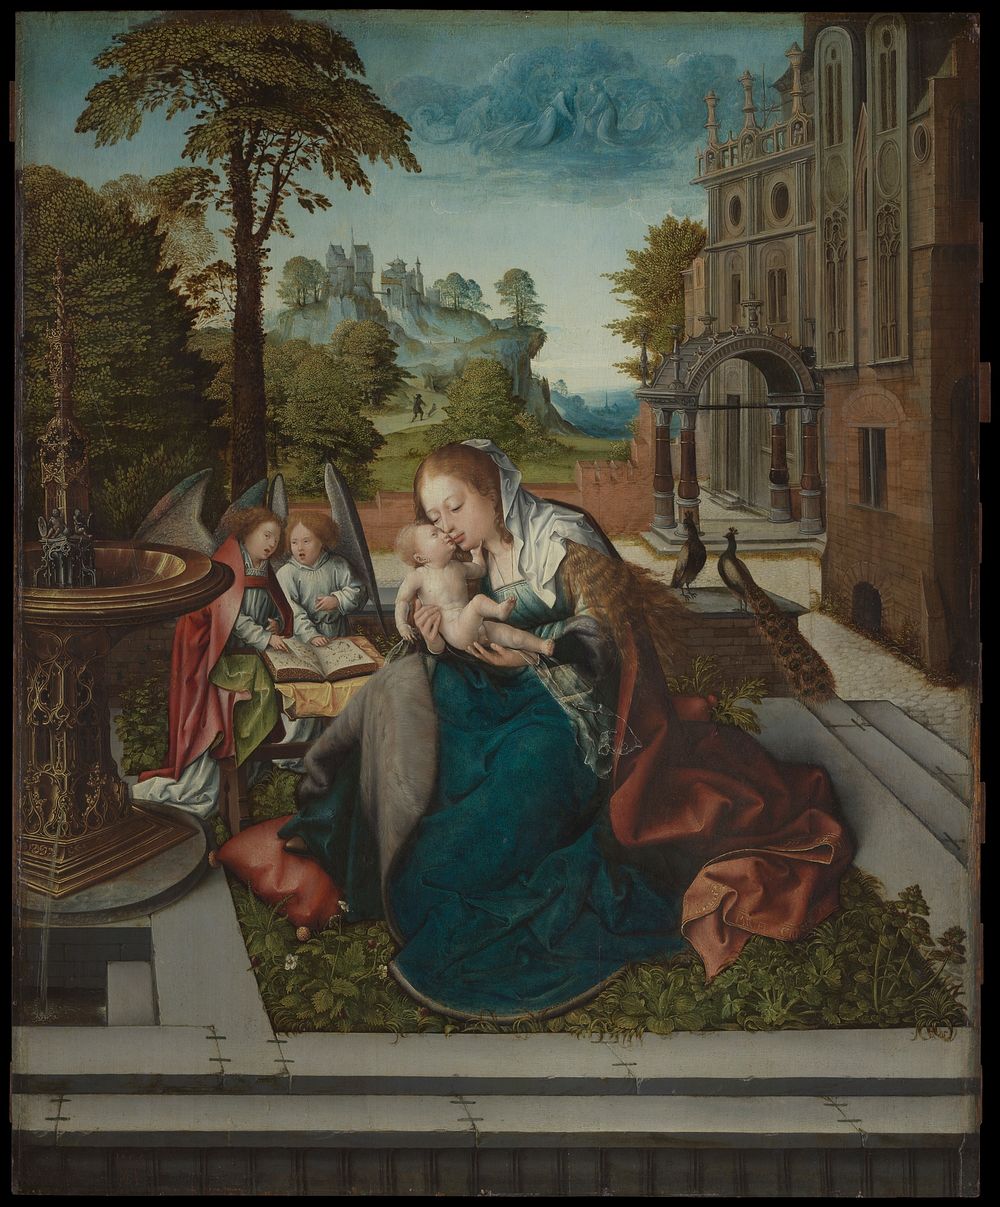 Virgin and Child with Angels by Bernard van Orley